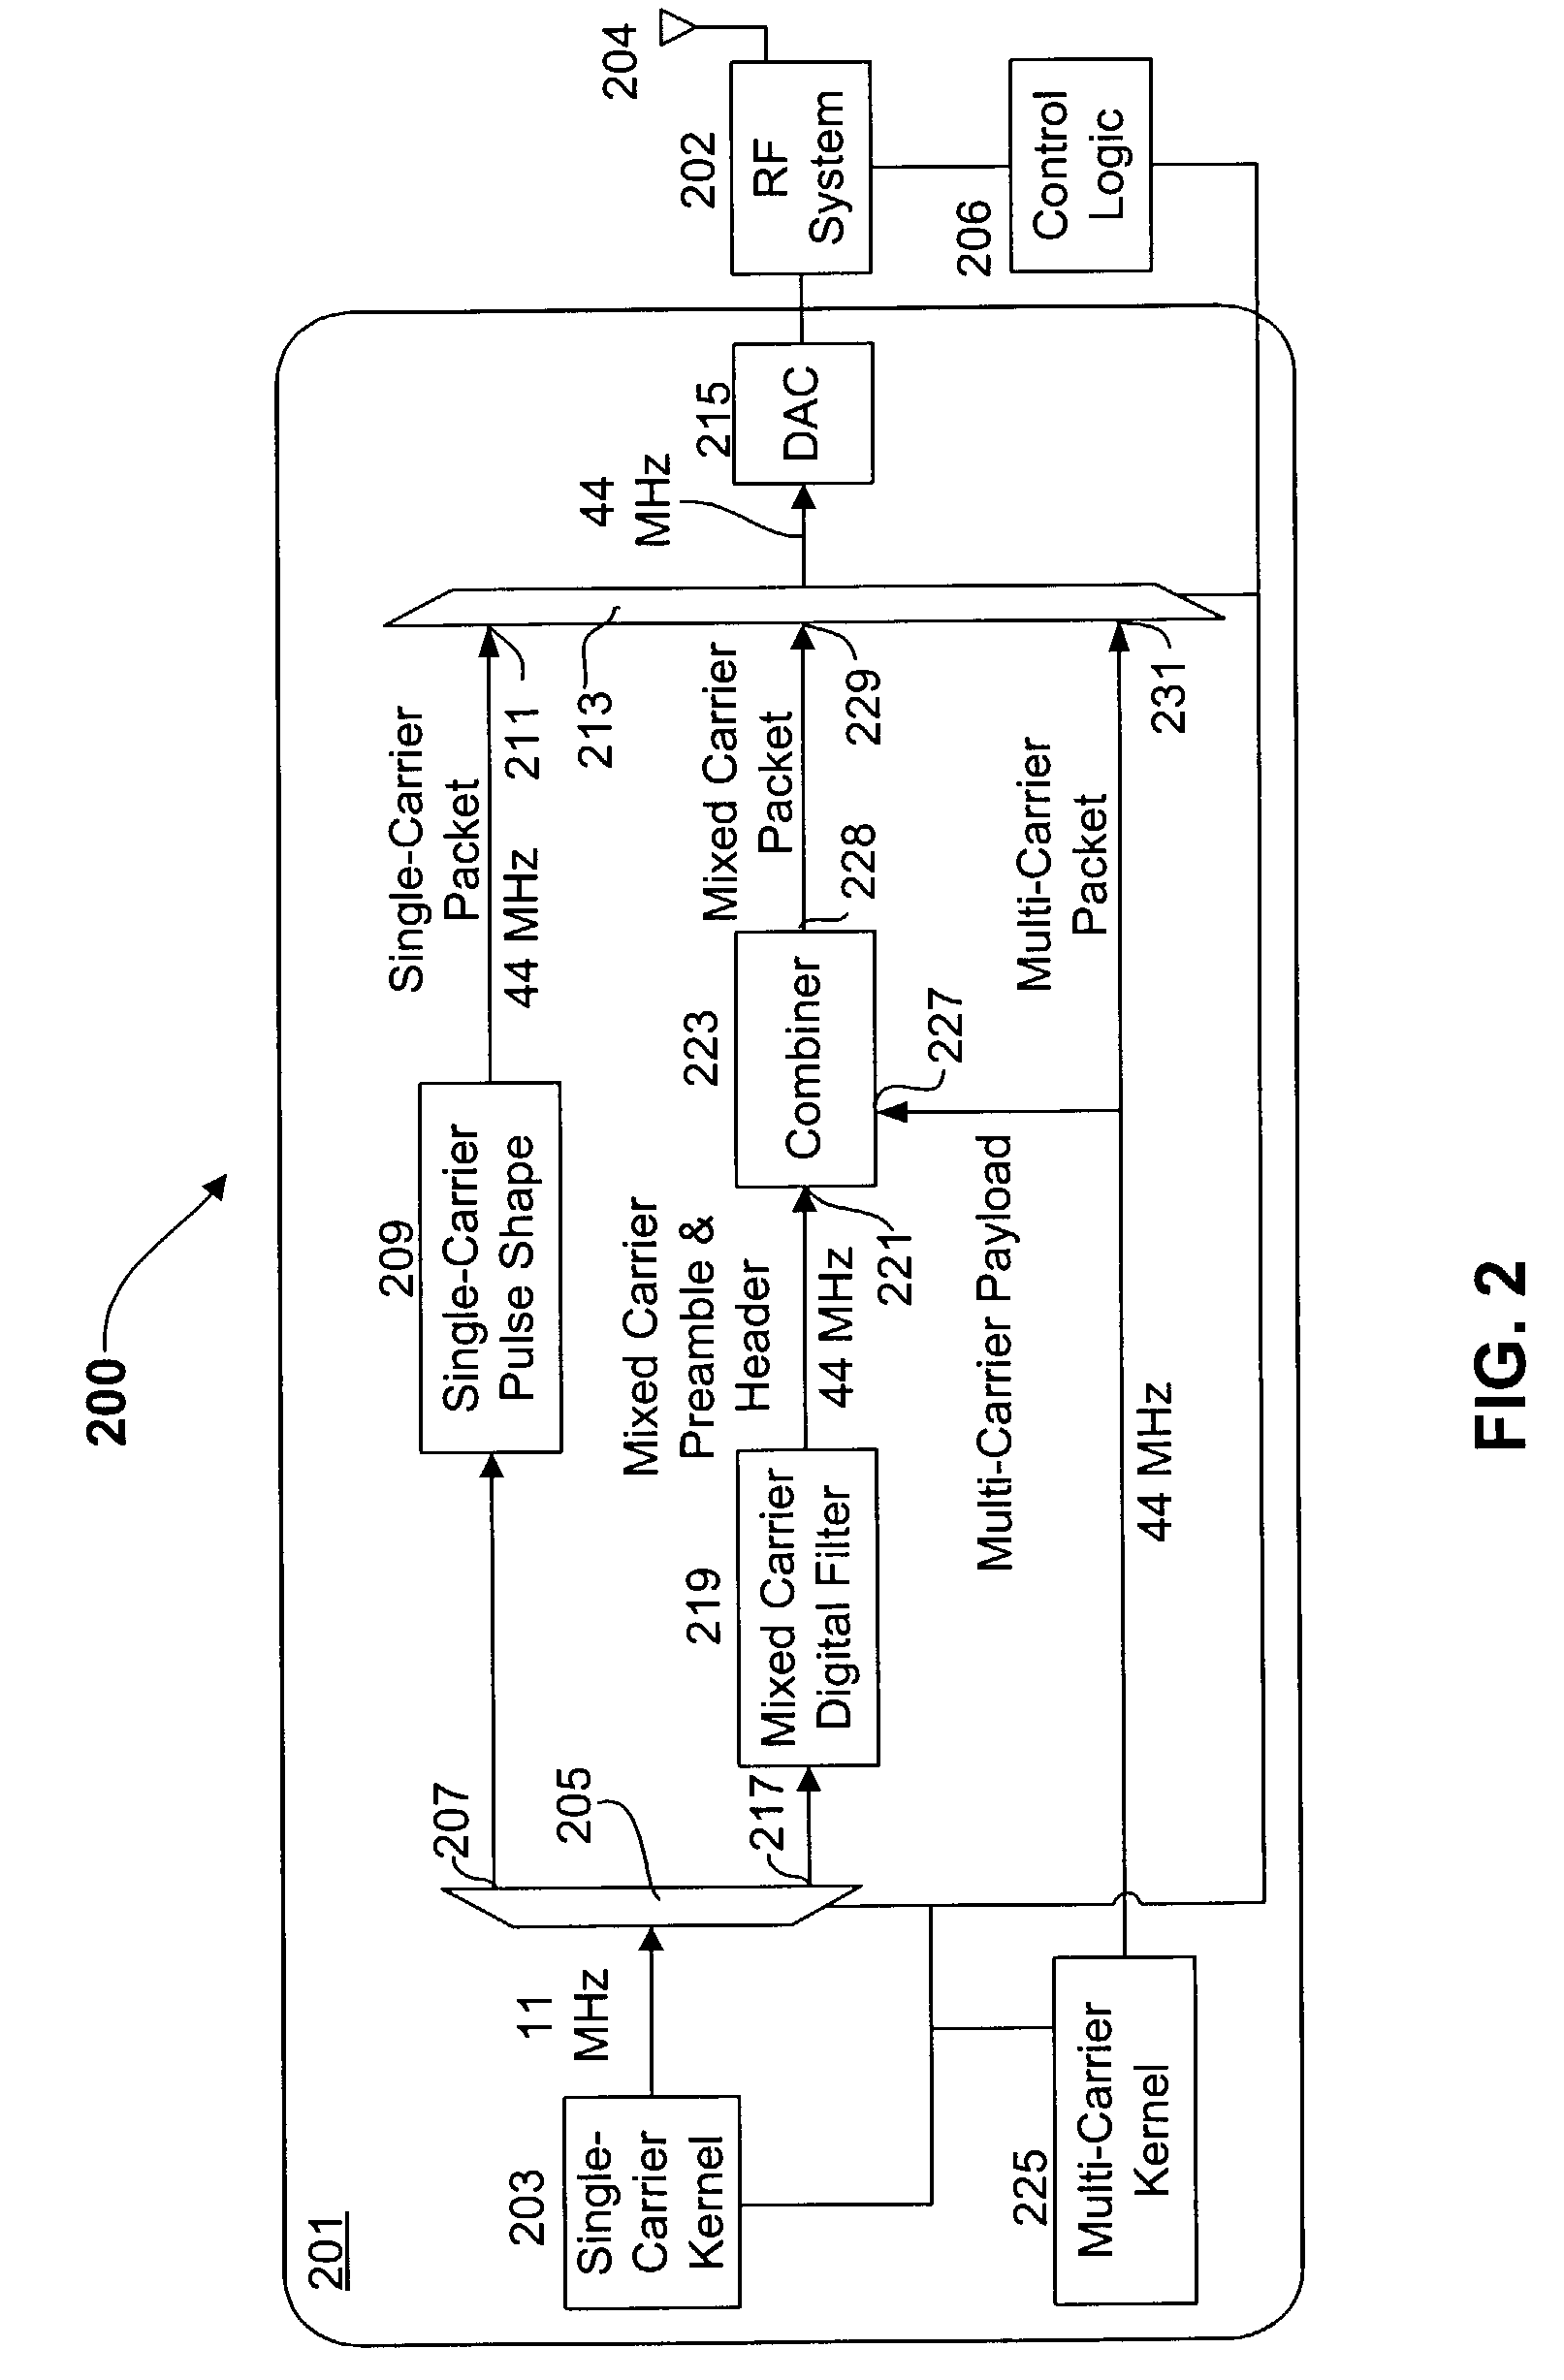 Single-carrier to multi-carrier wireless architecture